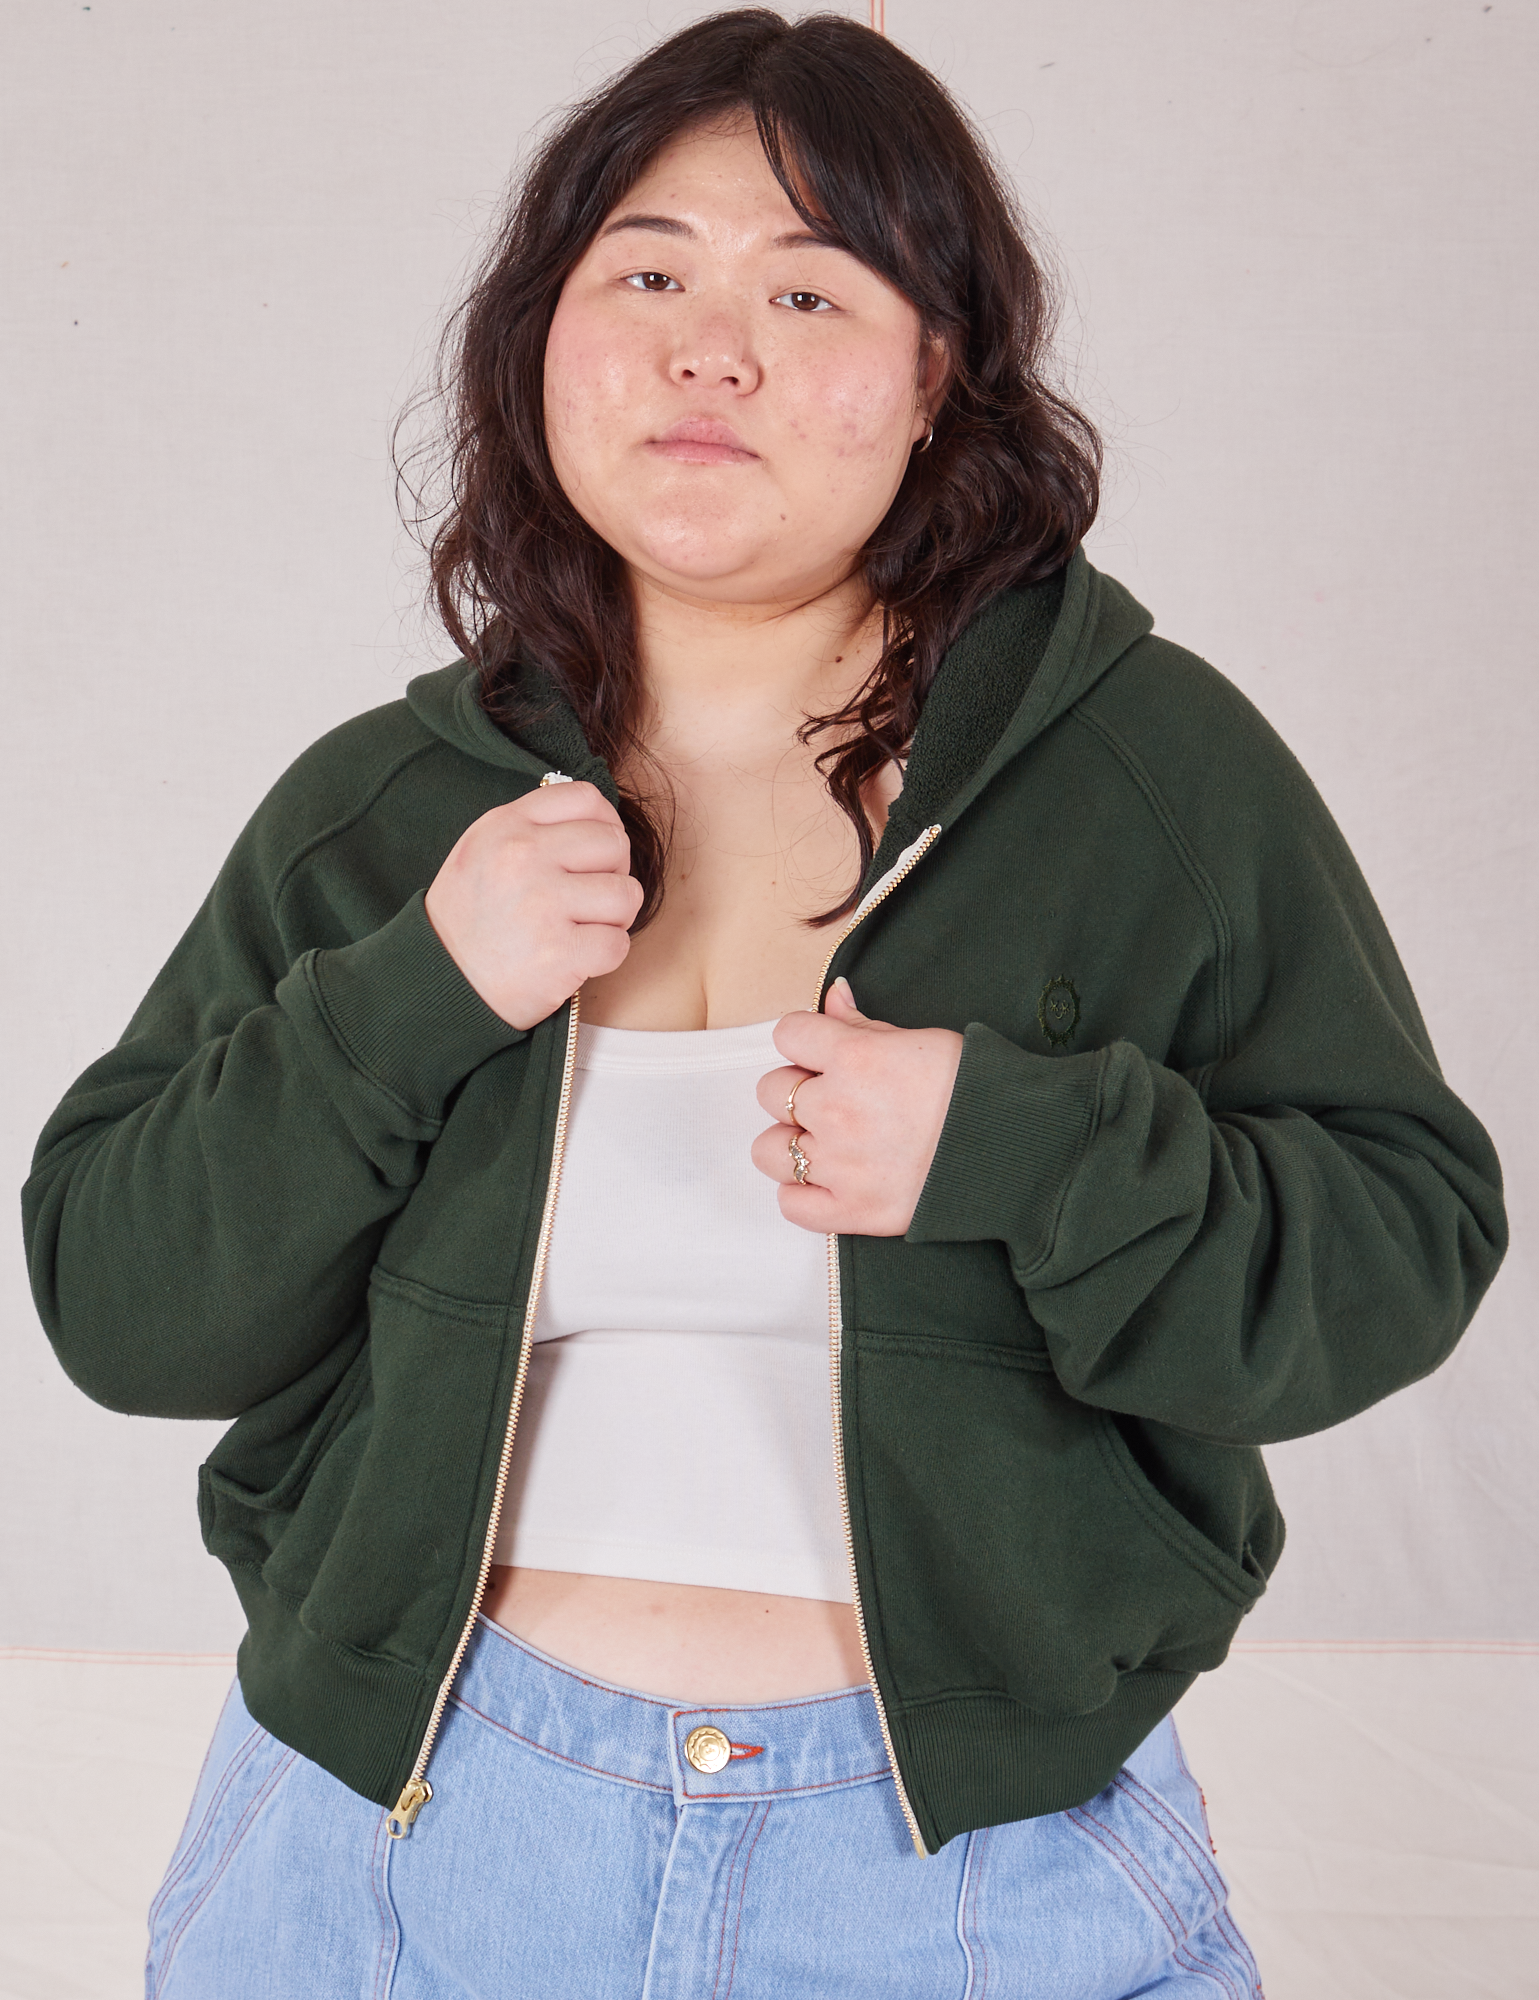 Ashley is wearing Cropped Zip Hoodie in Swamp Green with a vintage off-white Cropped Tank underneath